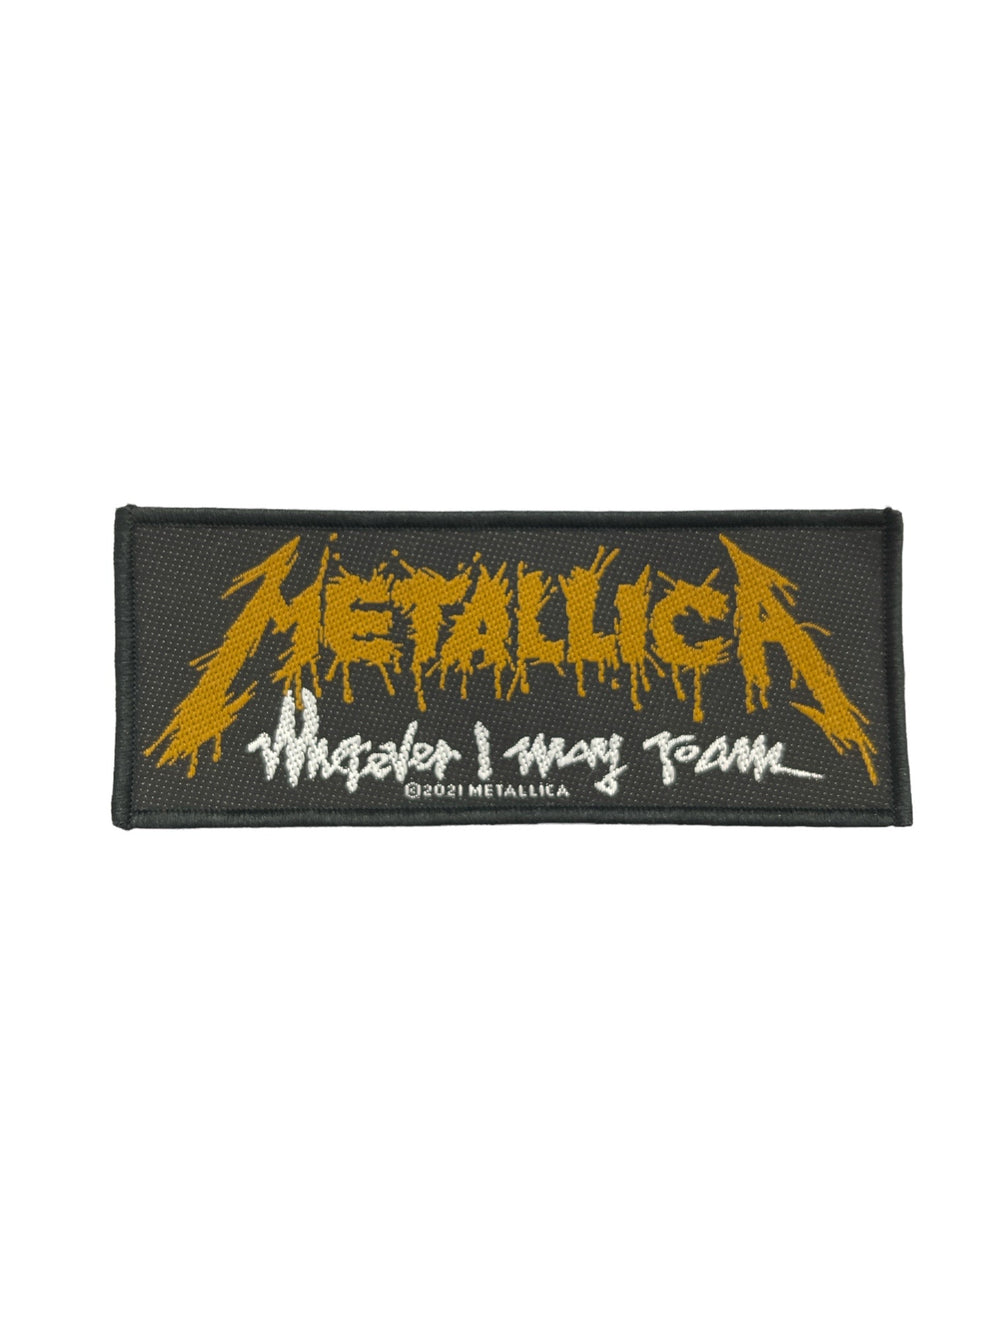 Metallica Wherever I May Roam Official Woven Patch Brand New